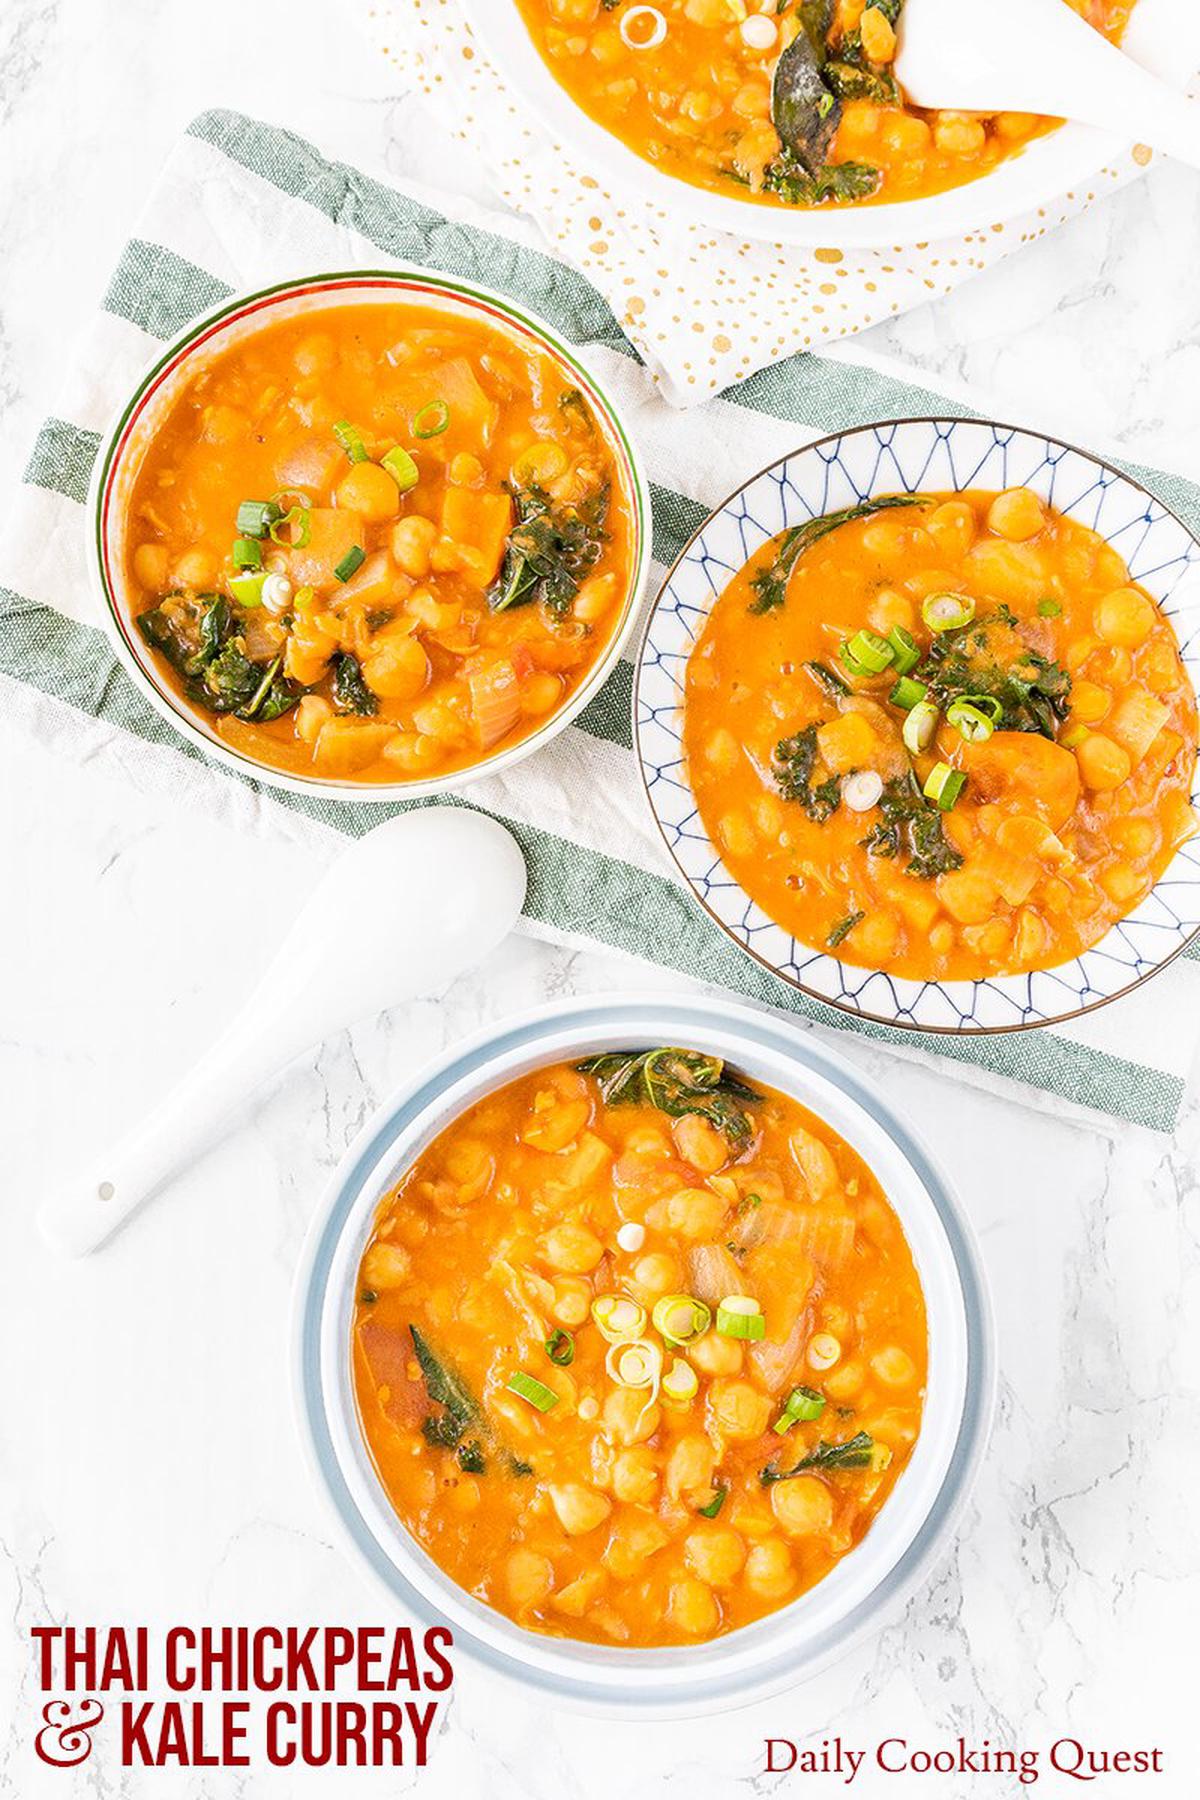 Thai chickpeas and kale curry.